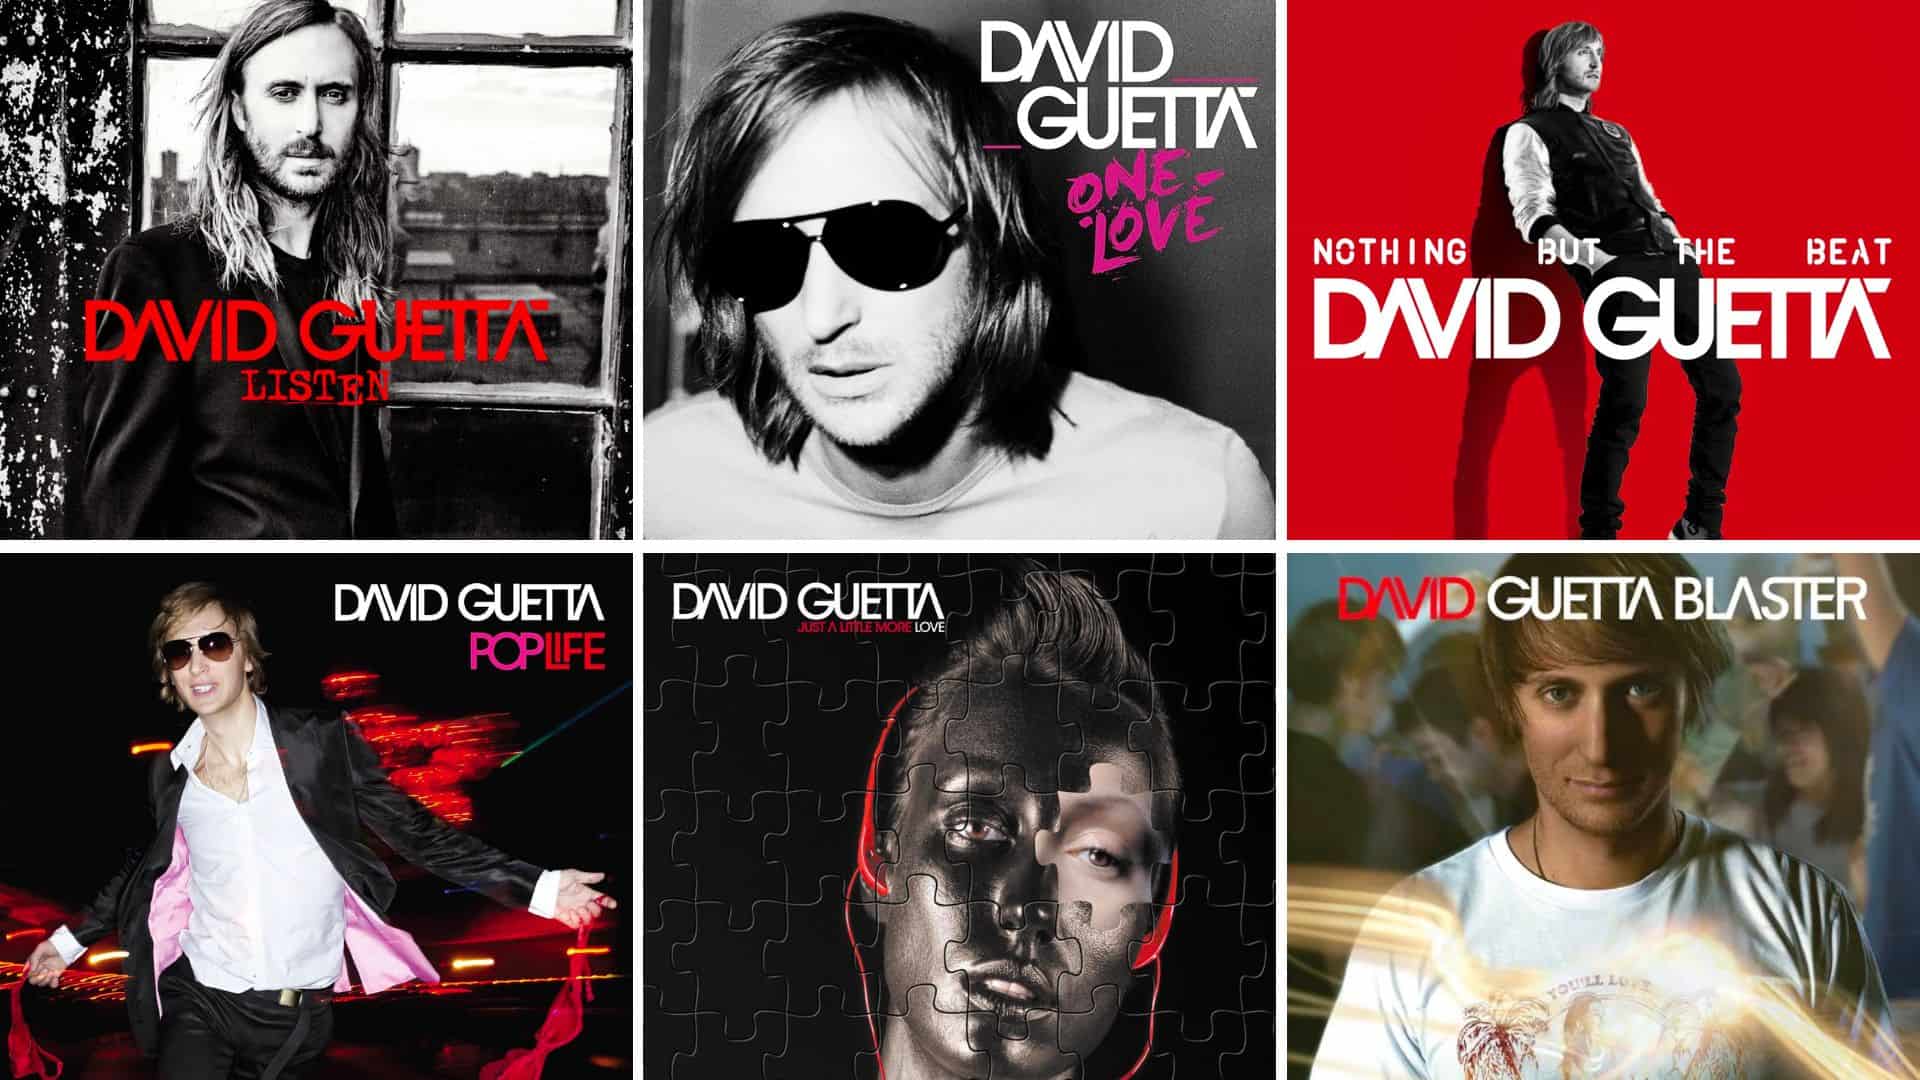 David Guetta turns 56: Celebrating The Legend’s Birthday with His Most Iconic Albums